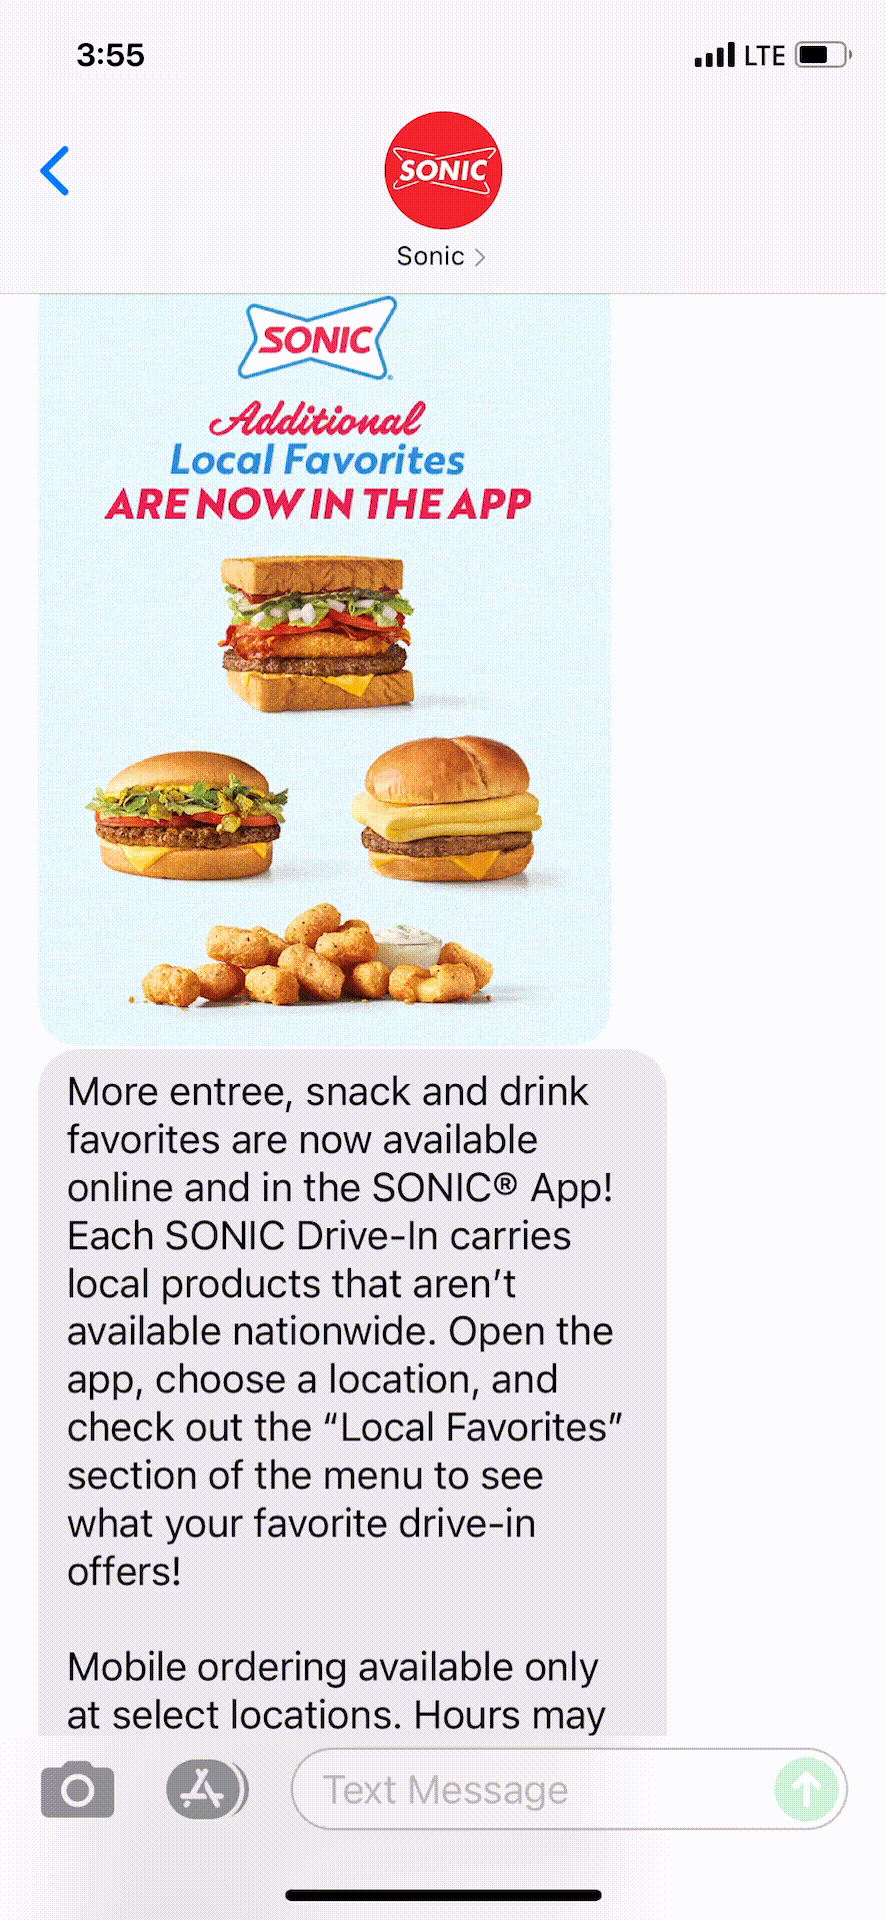 Sonic-Text-Message-Marketing-Example-10.20.2021